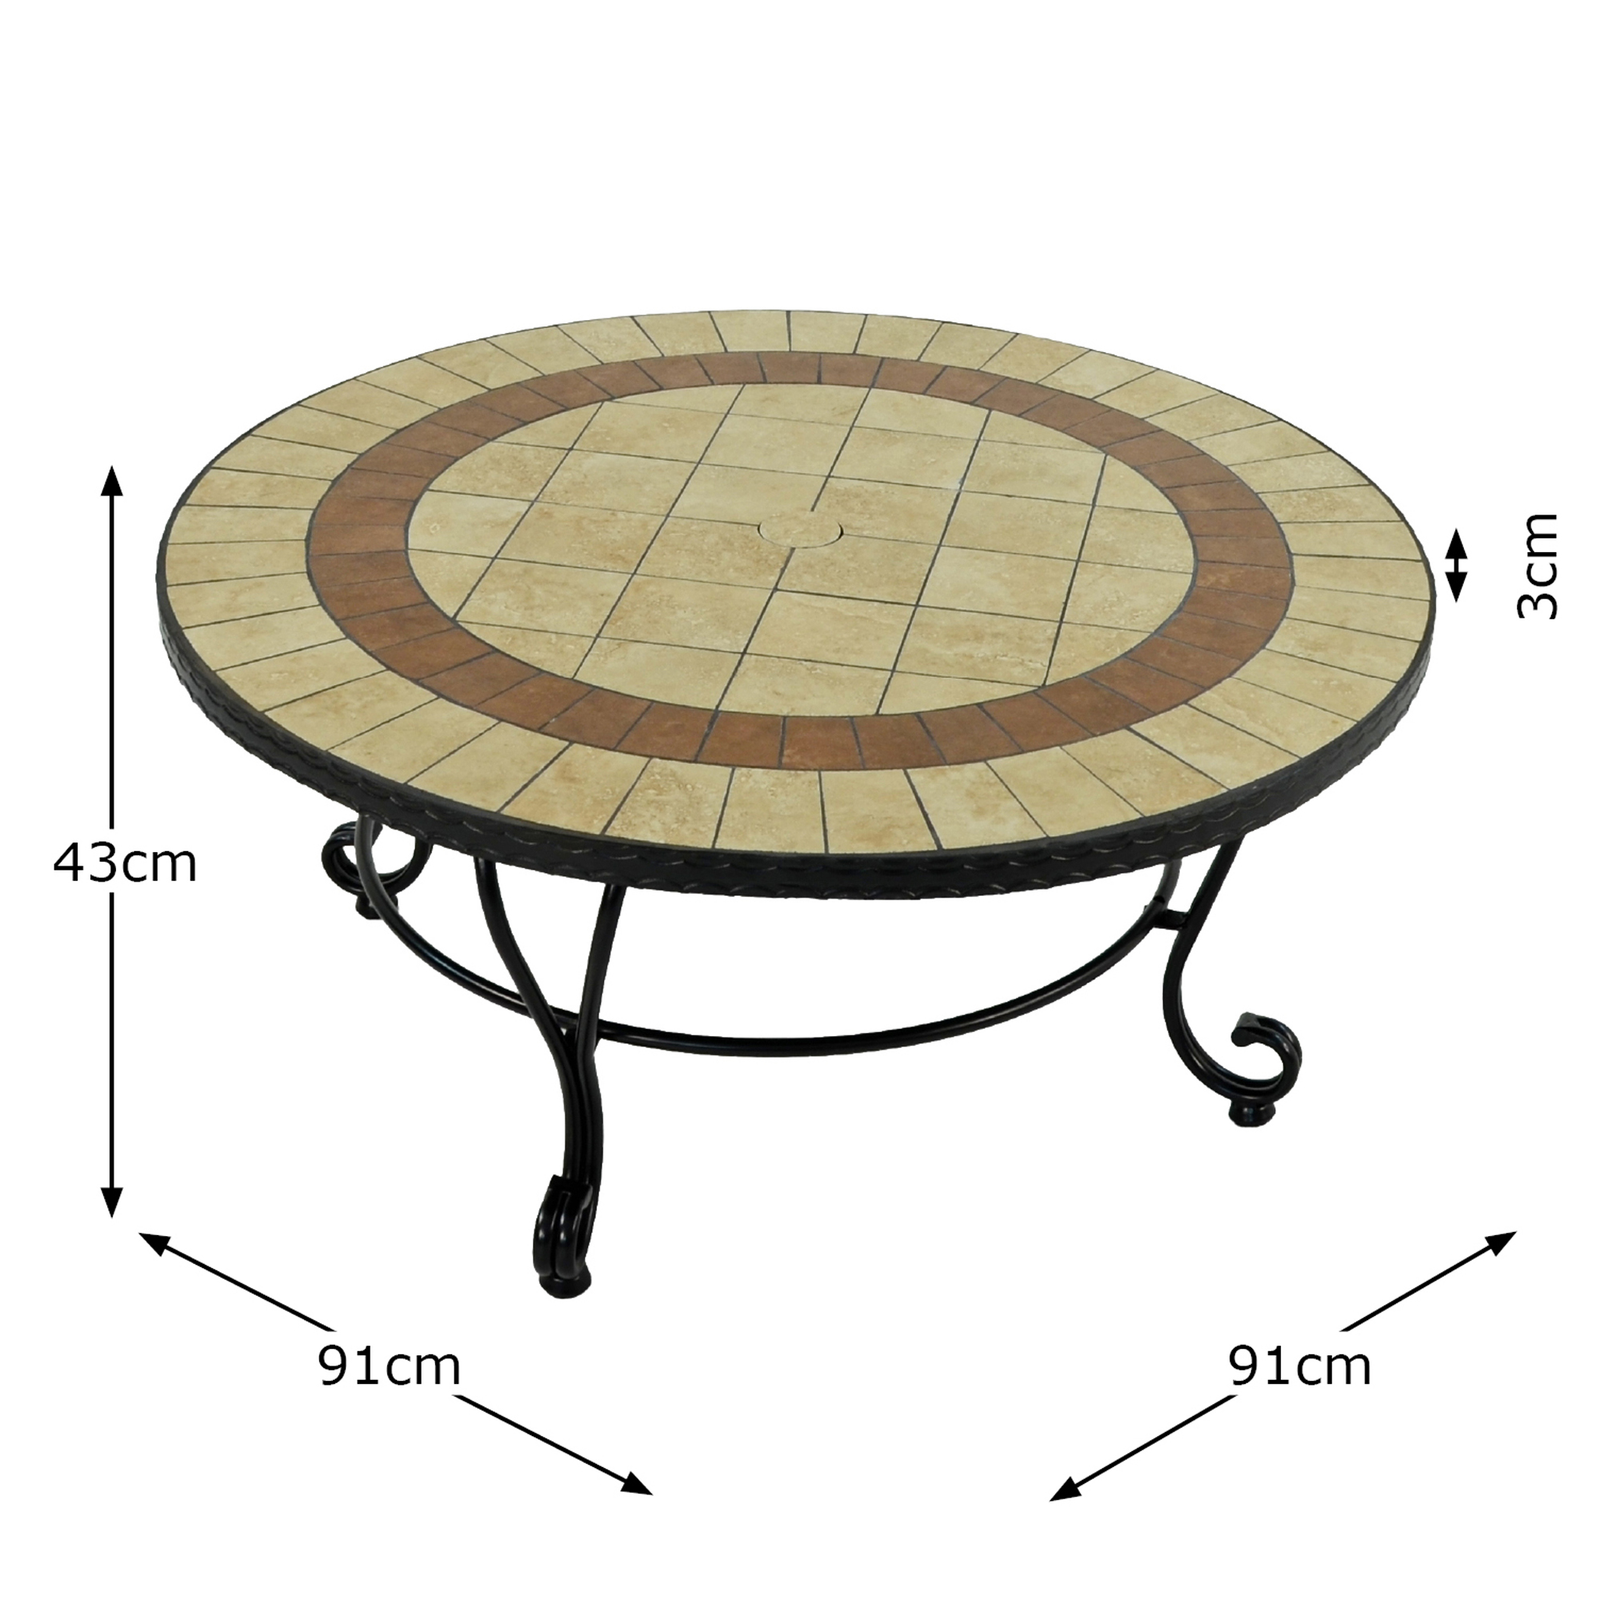 Exclusive Garden Henley 91cm Coffee Table With 4 Windsor Lounge Chair Set Dining Sets Exclusive Garden   